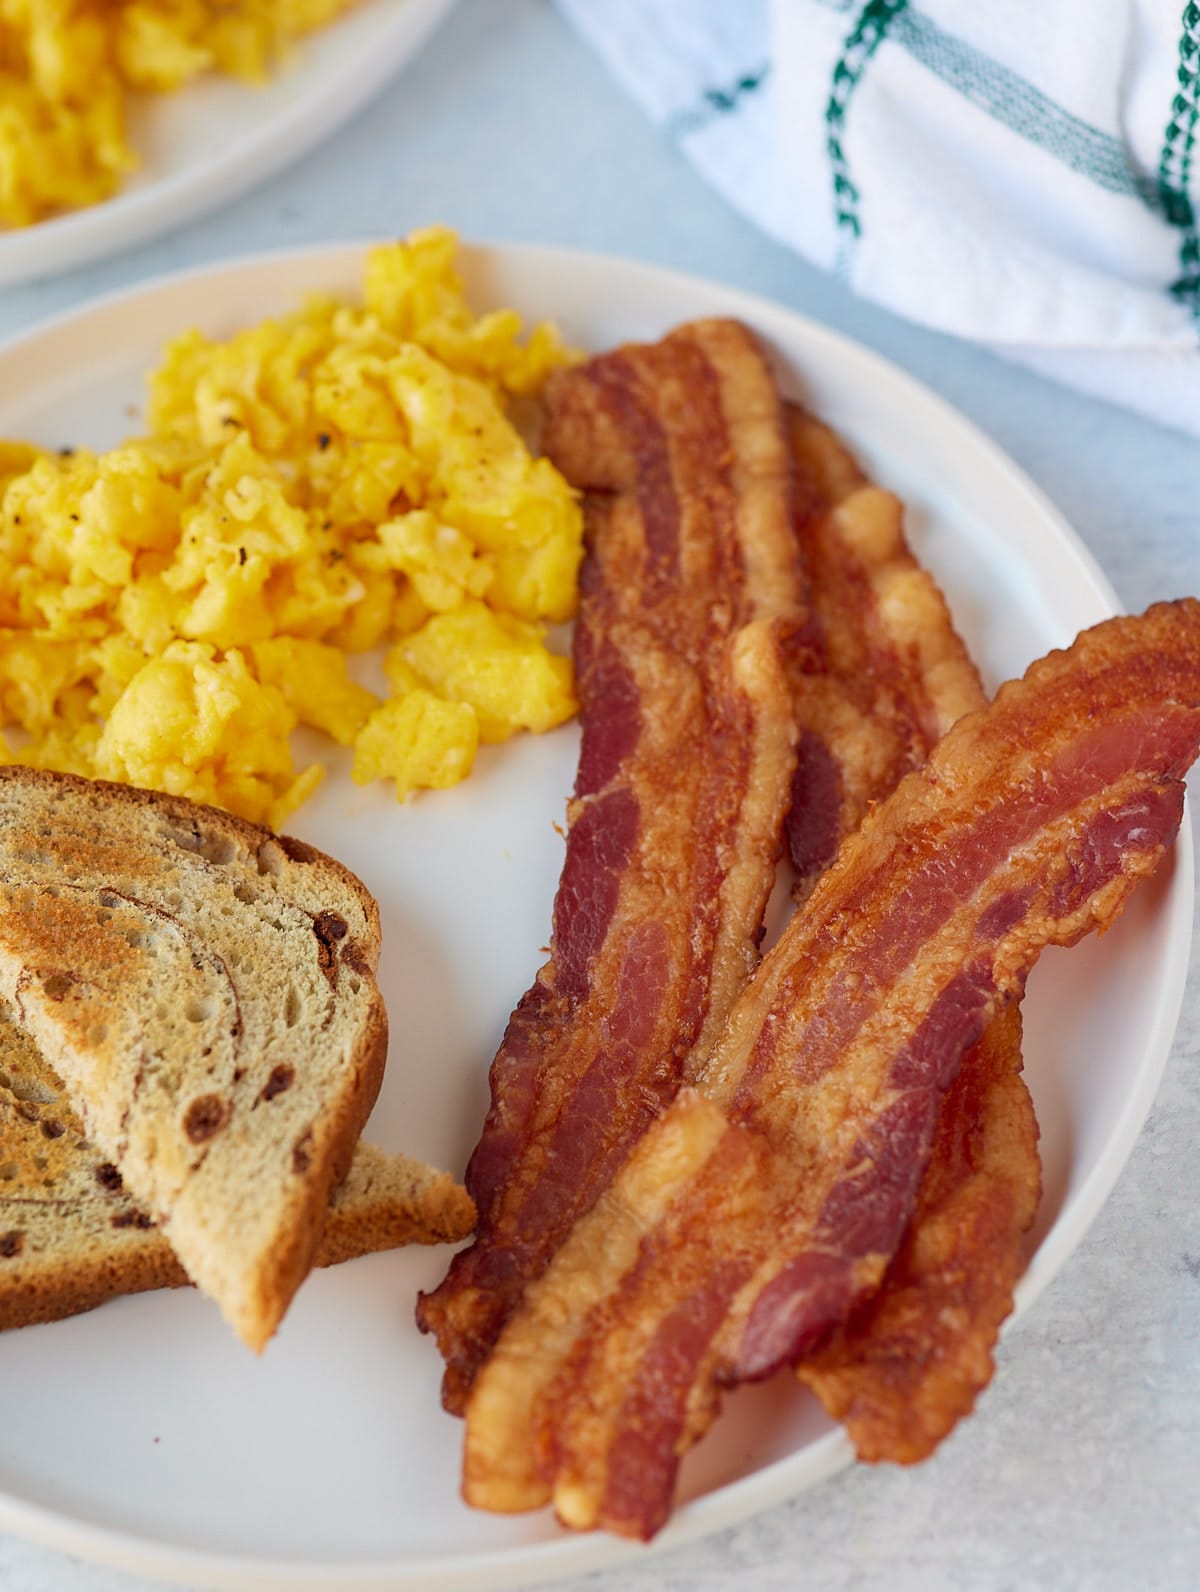 Oven baked bacon served with scrambled eggs and toast.